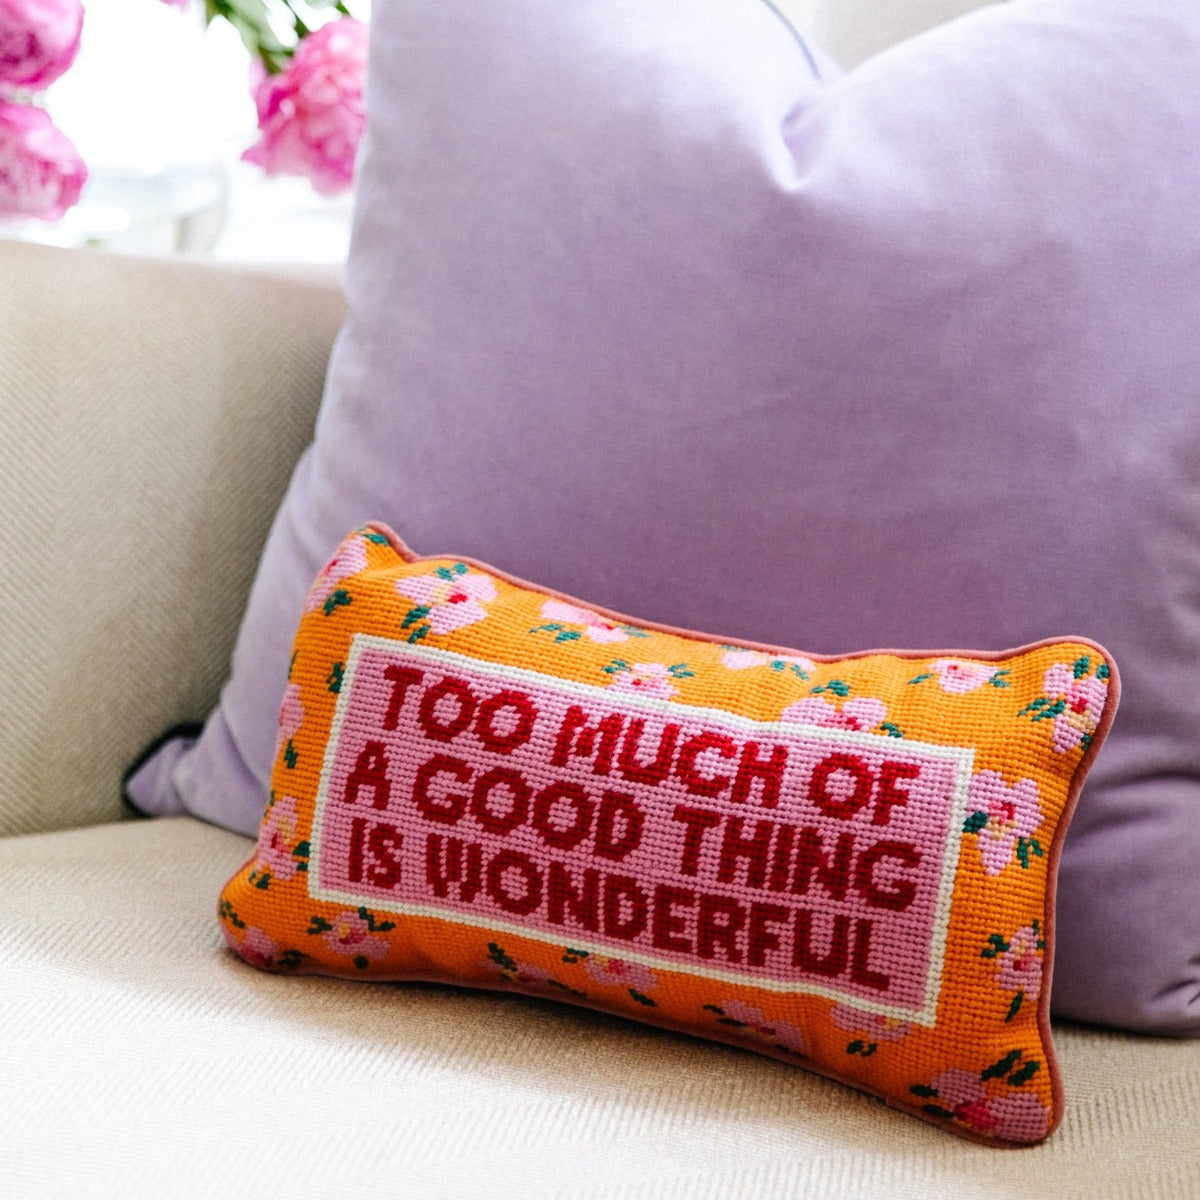 Too Much Needlepoint Pillow